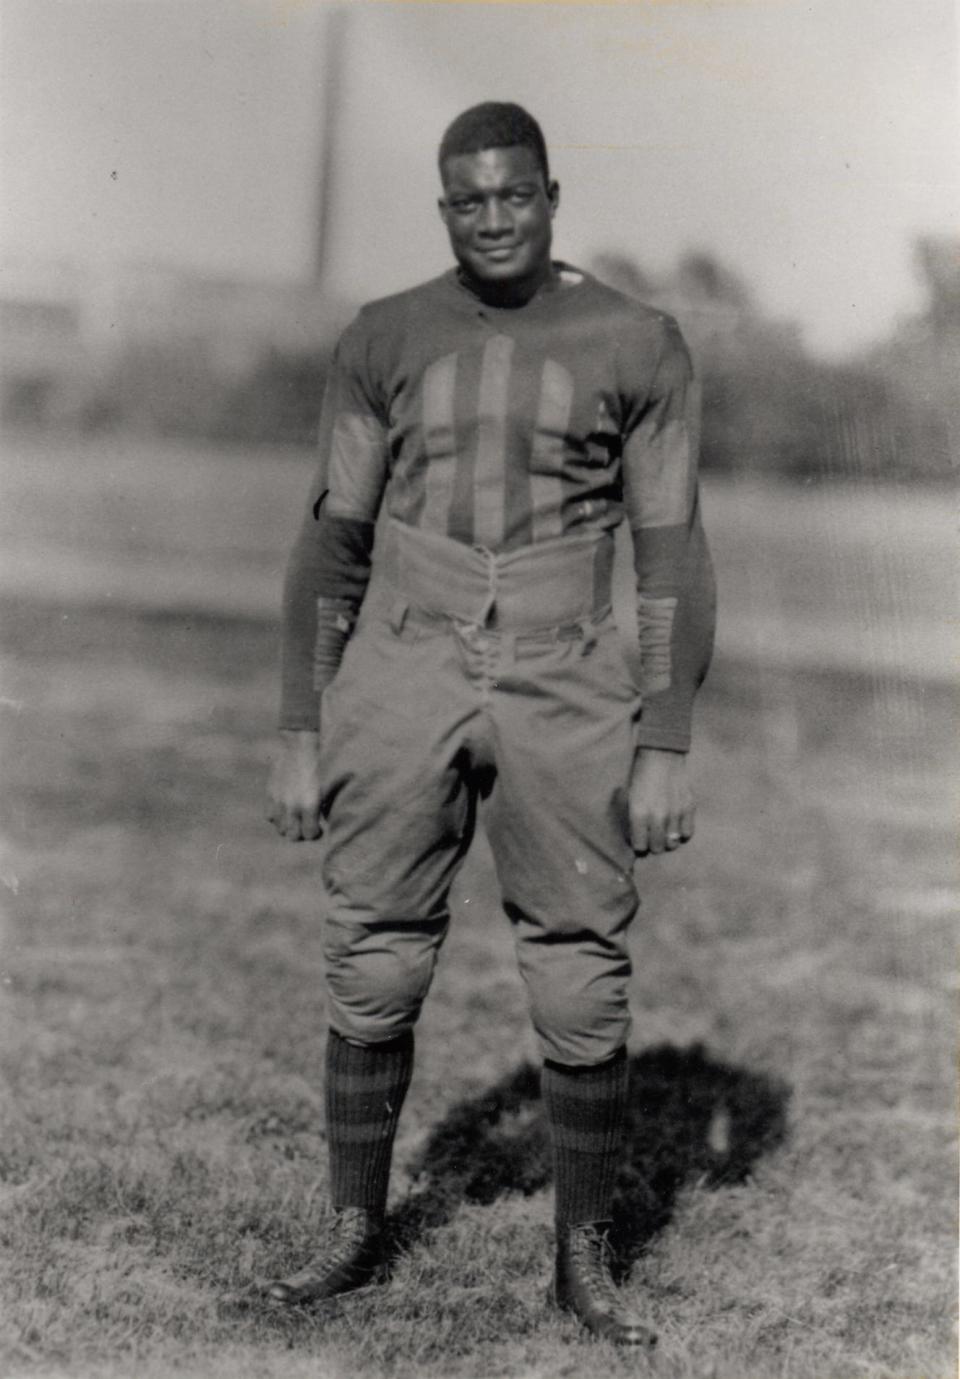 Jack Trice, shown here in a school photo.